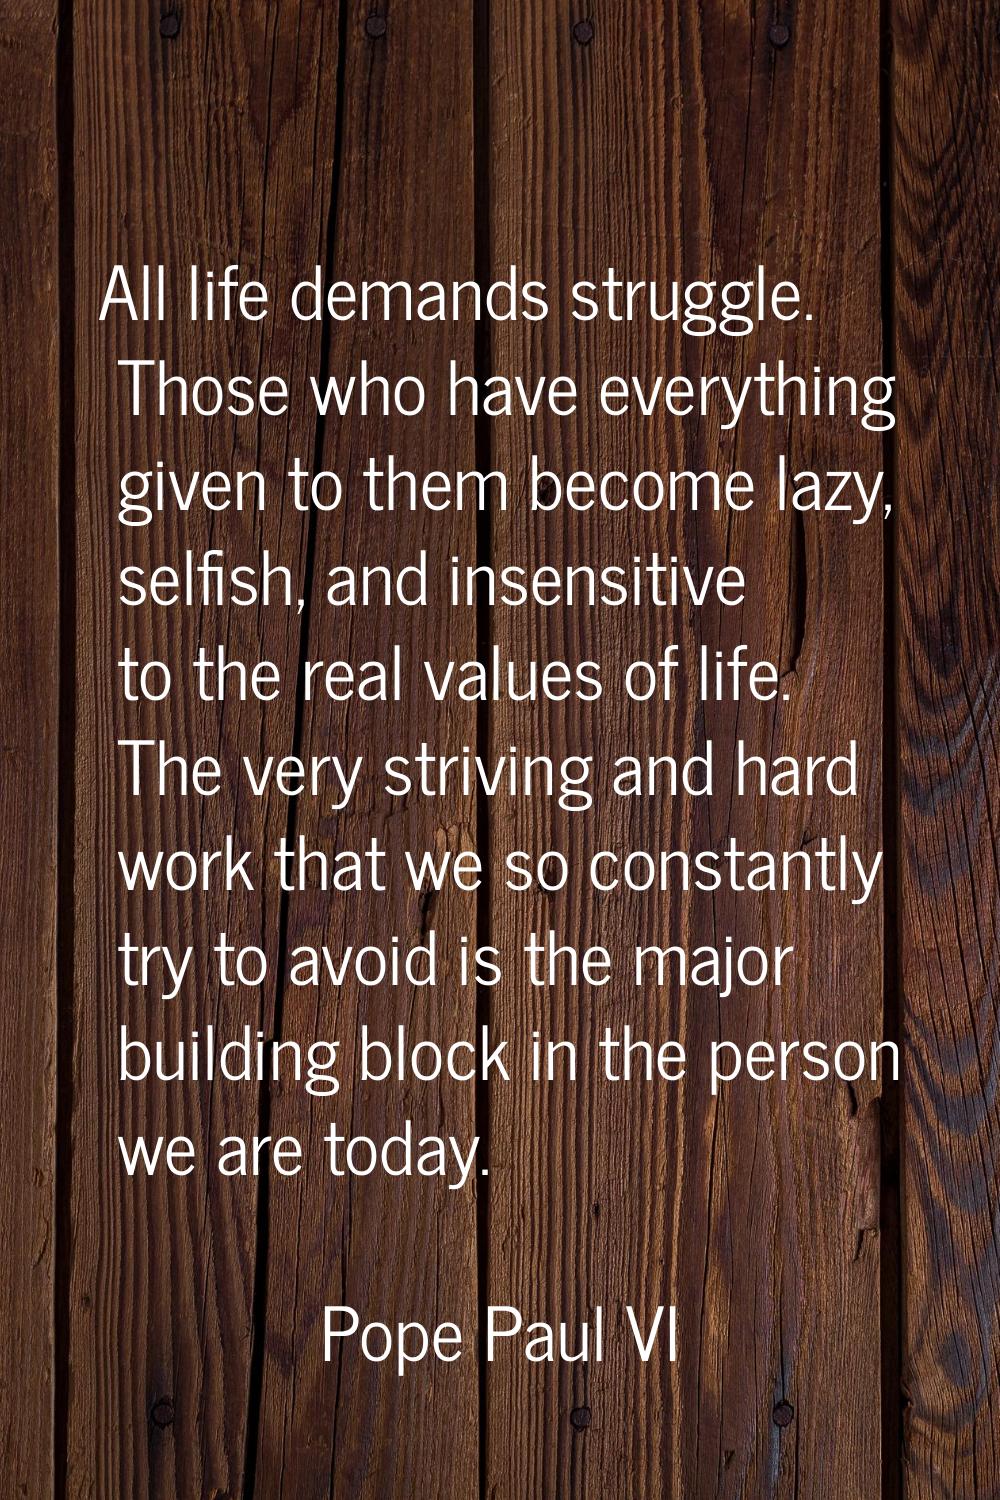 All life demands struggle. Those who have everything given to them become lazy, selfish, and insens